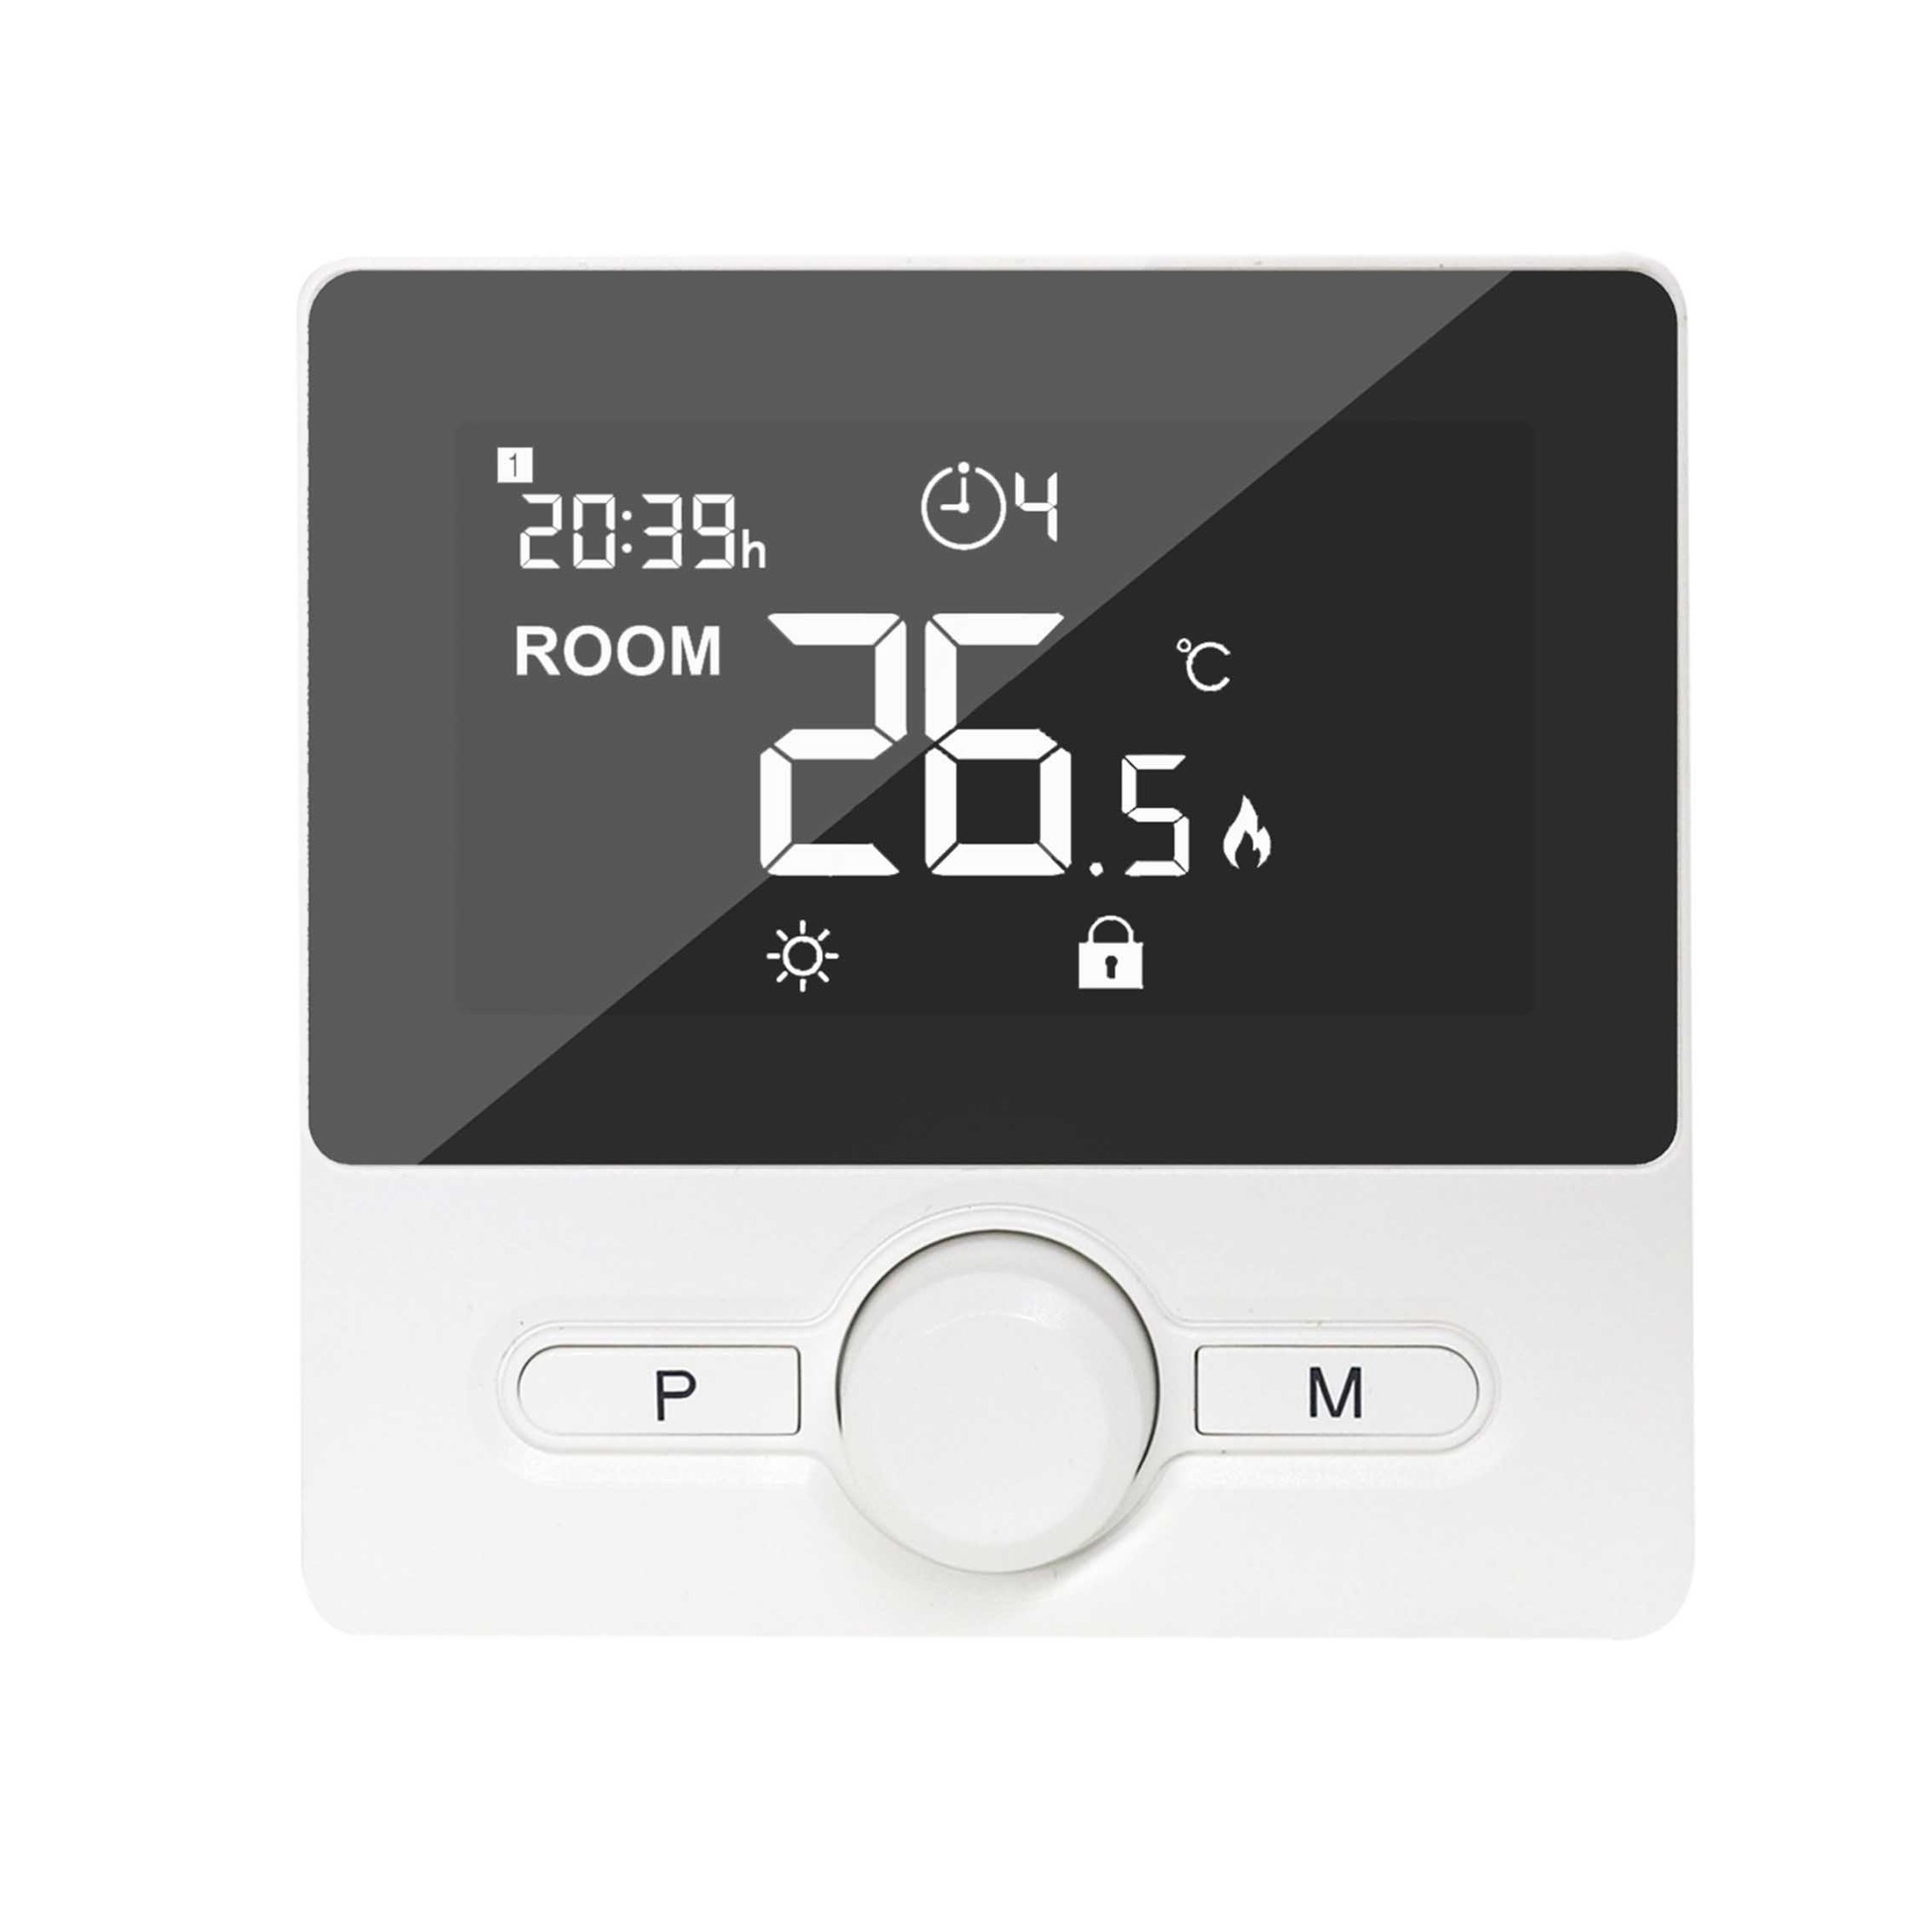 New Product Release - HT-25 Classic Boiler Thermostat